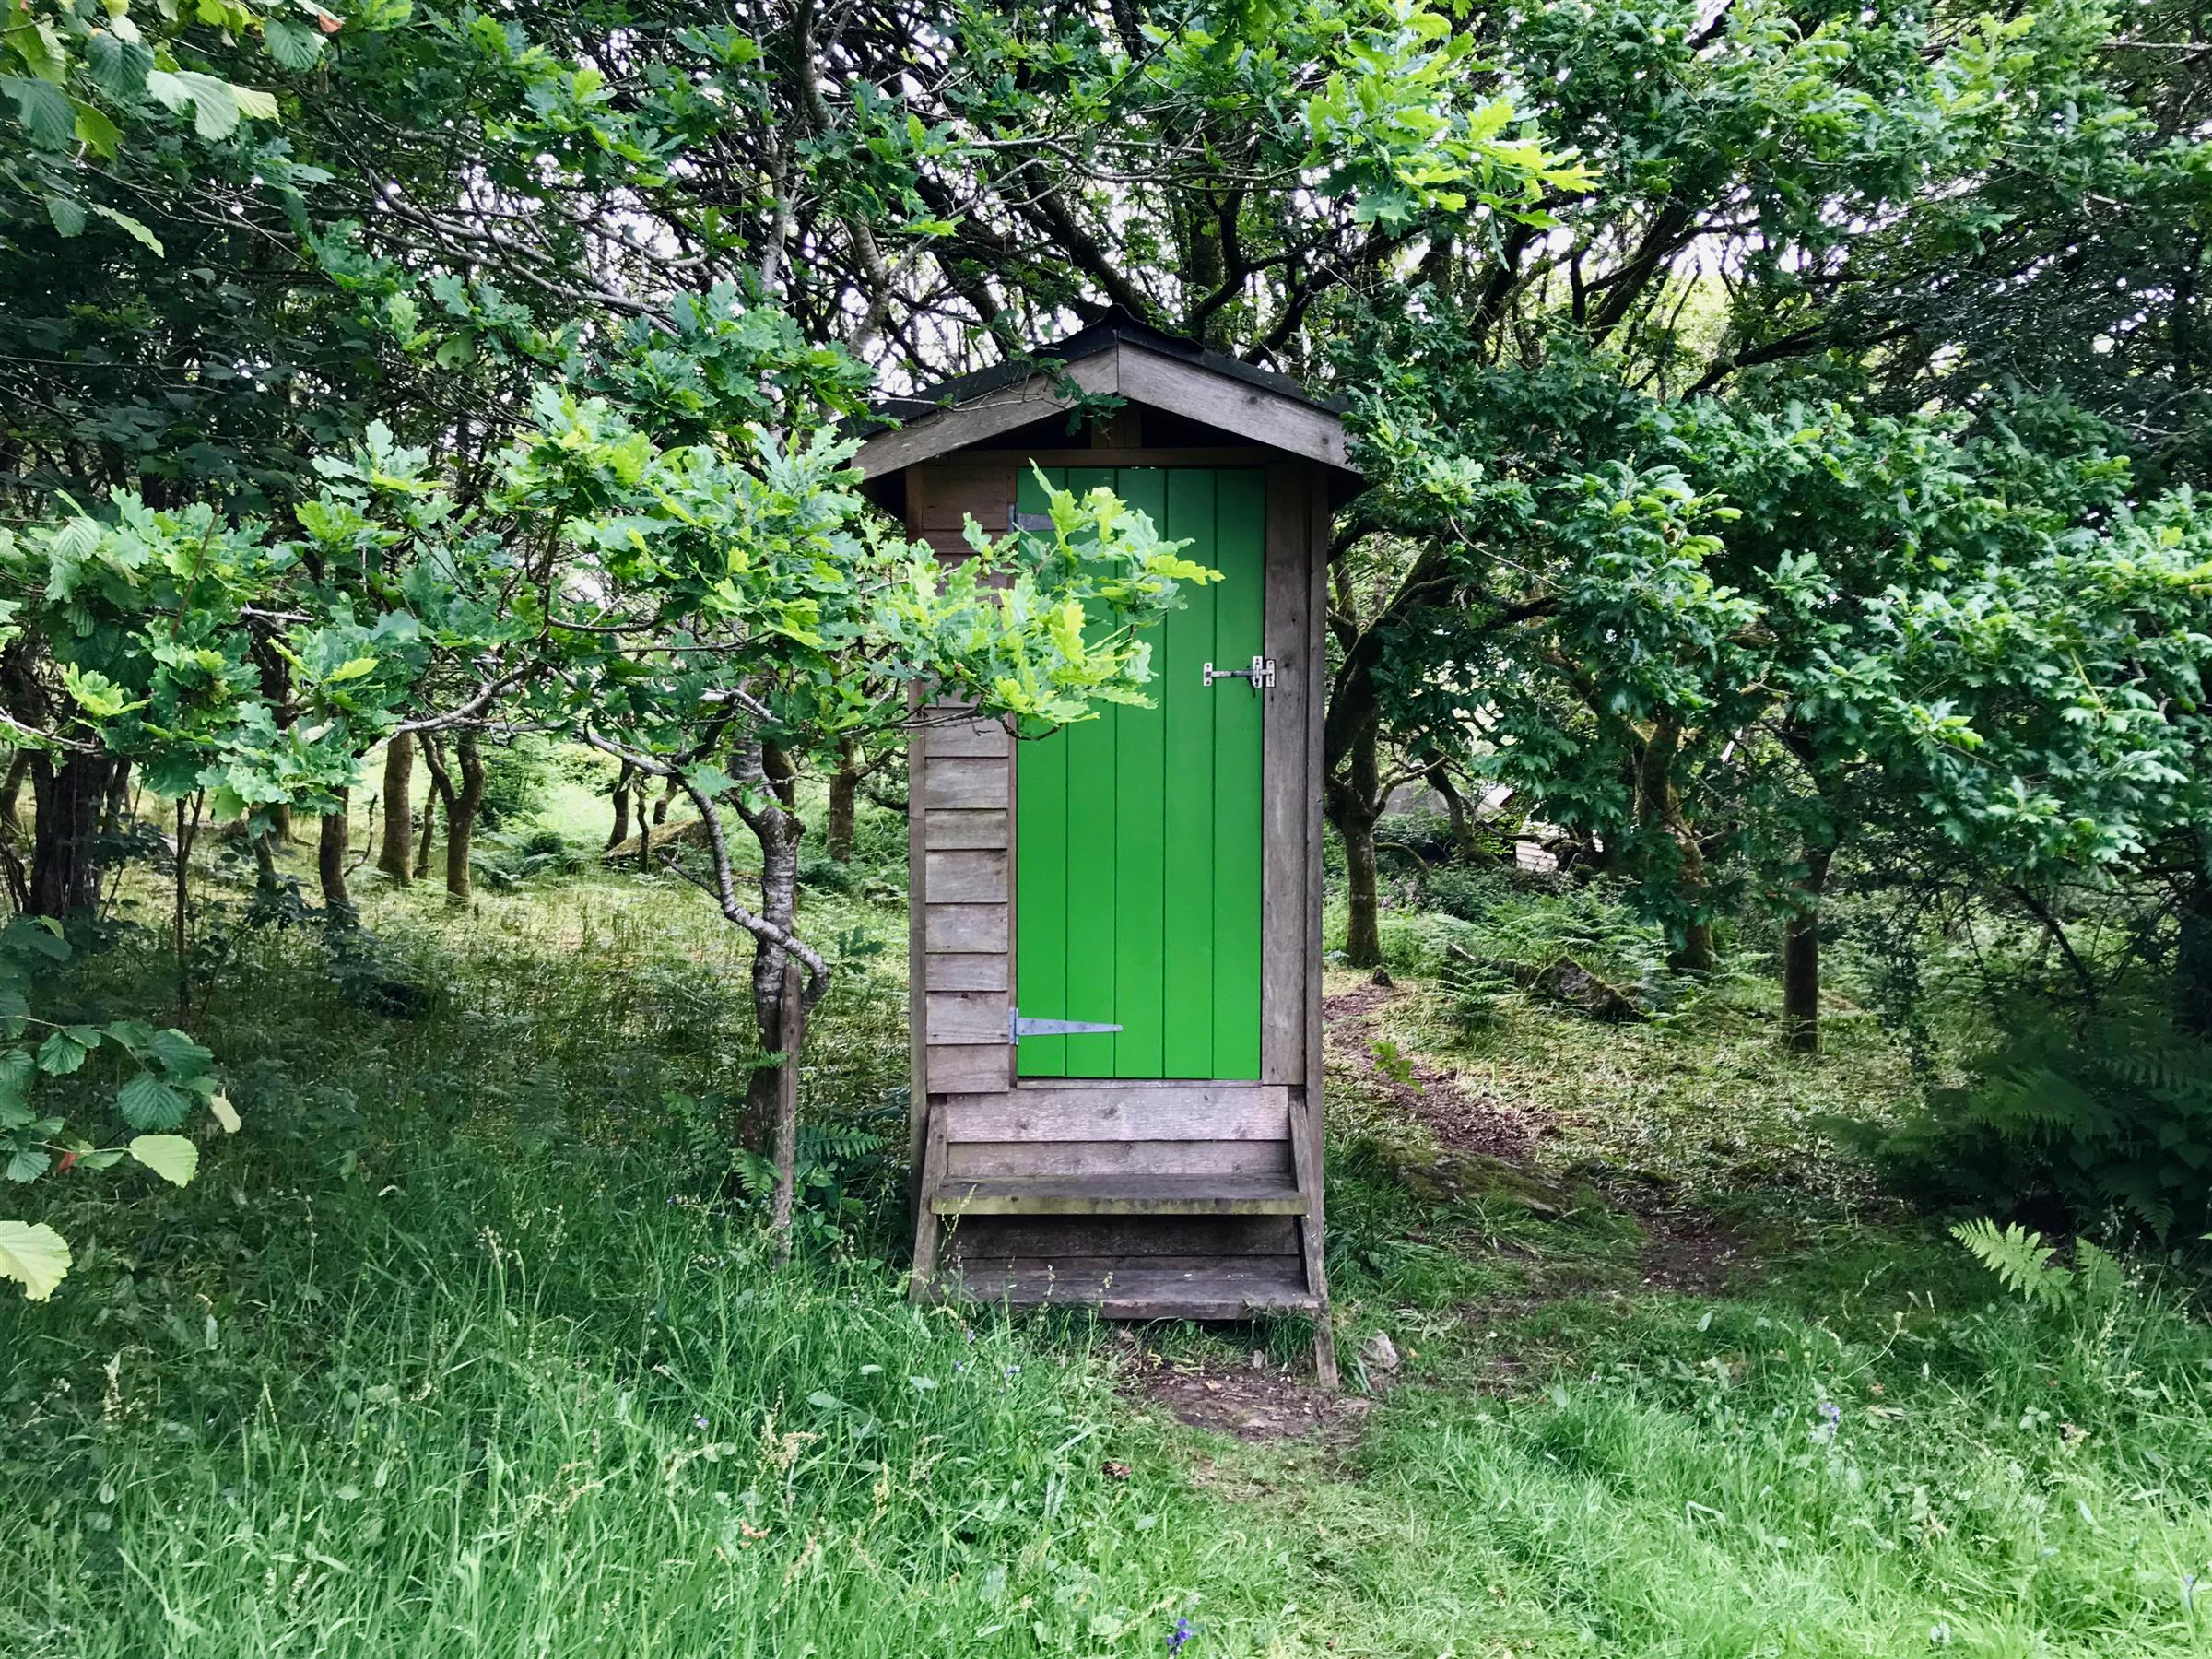 Compost toilets for each yurt